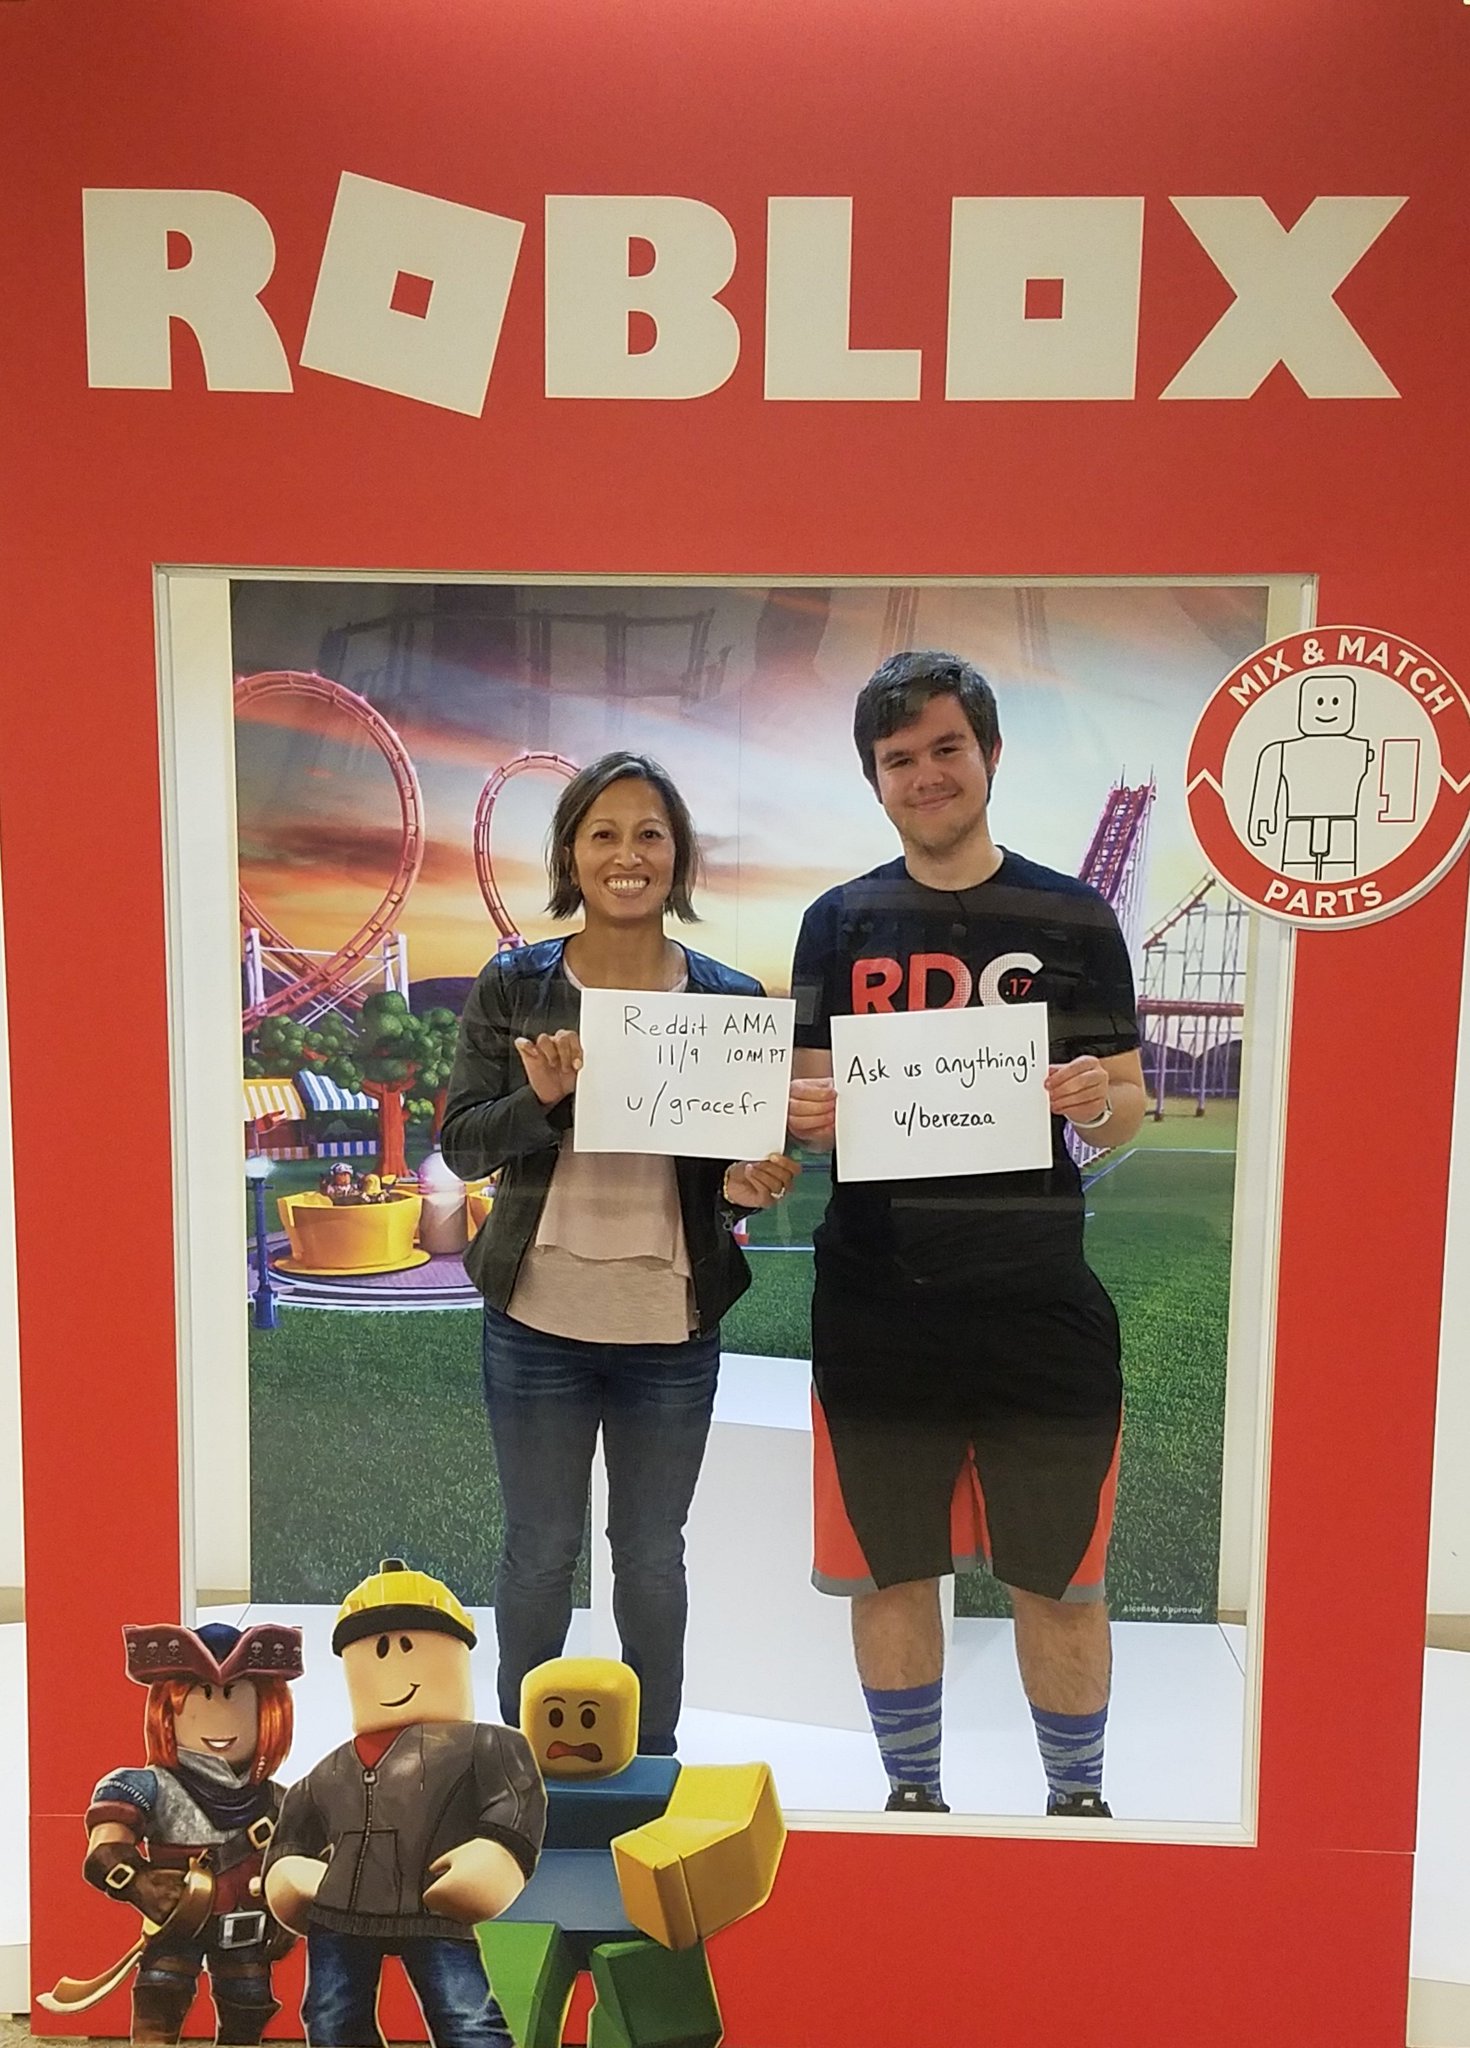 Roblox Developer Relations On Twitter Got Any Questions About - roblox developers faces